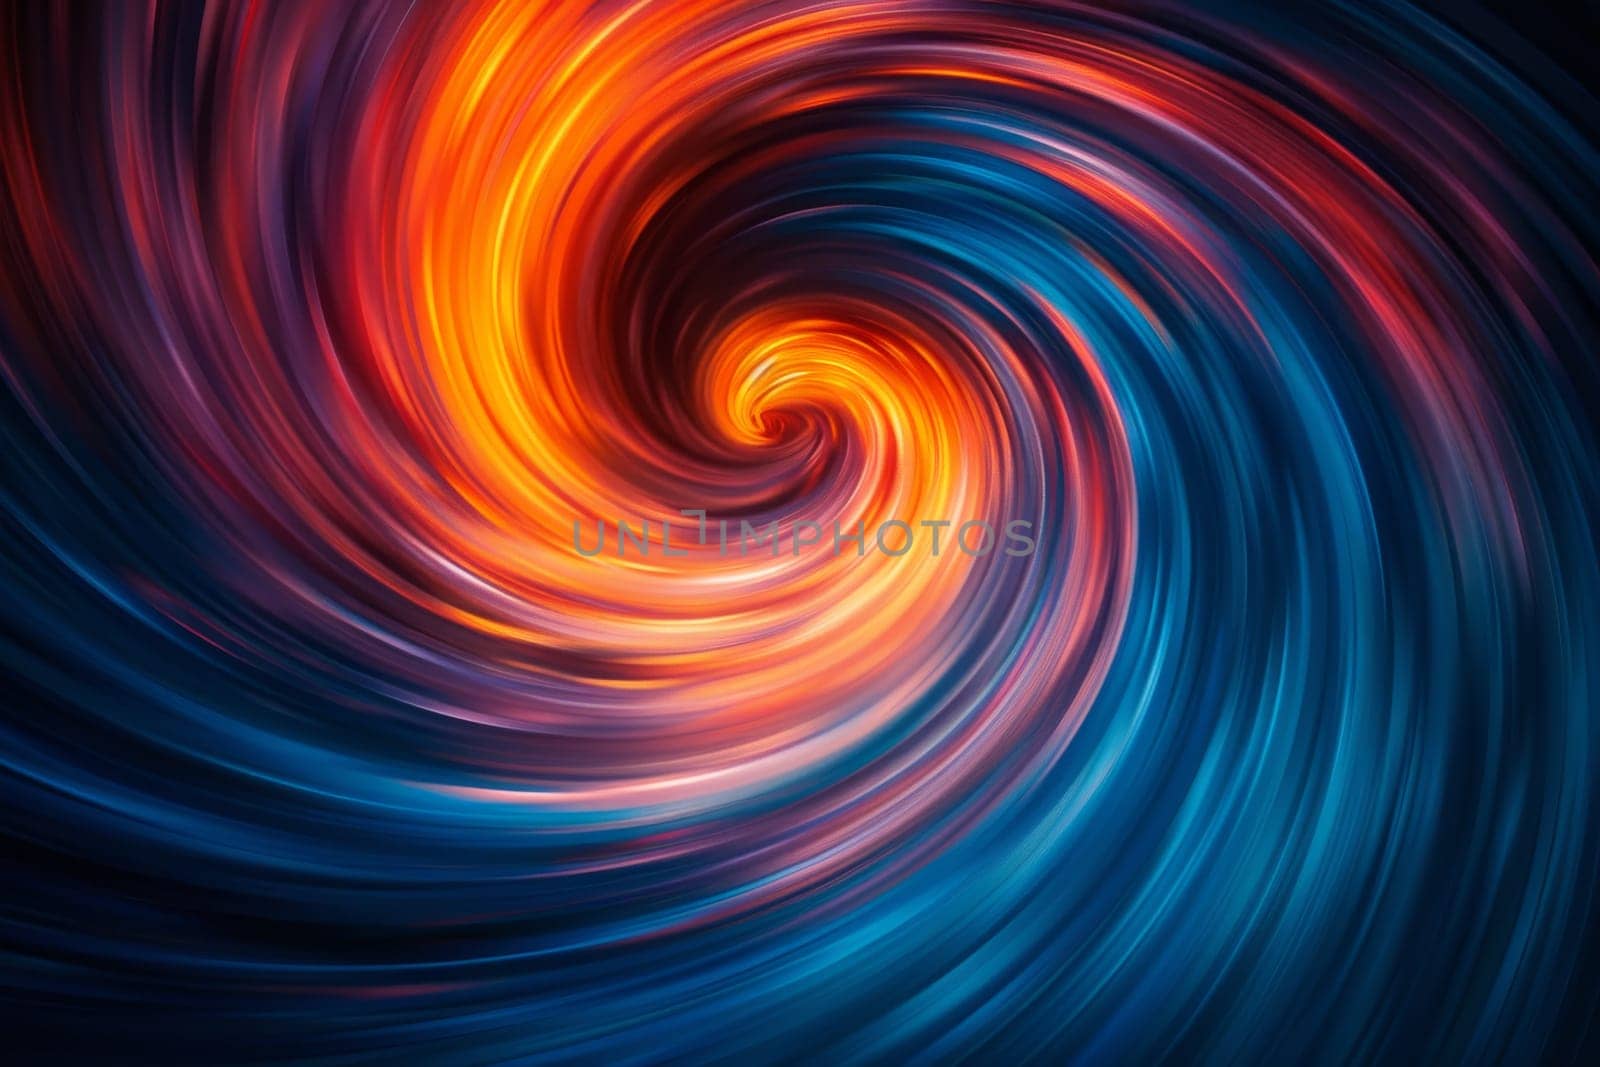 A colorful, swirling pattern of red, blue, and white. The colors are bright and vibrant, creating a sense of energy and movement. The pattern seems to be abstract, with no clear subject or focal point